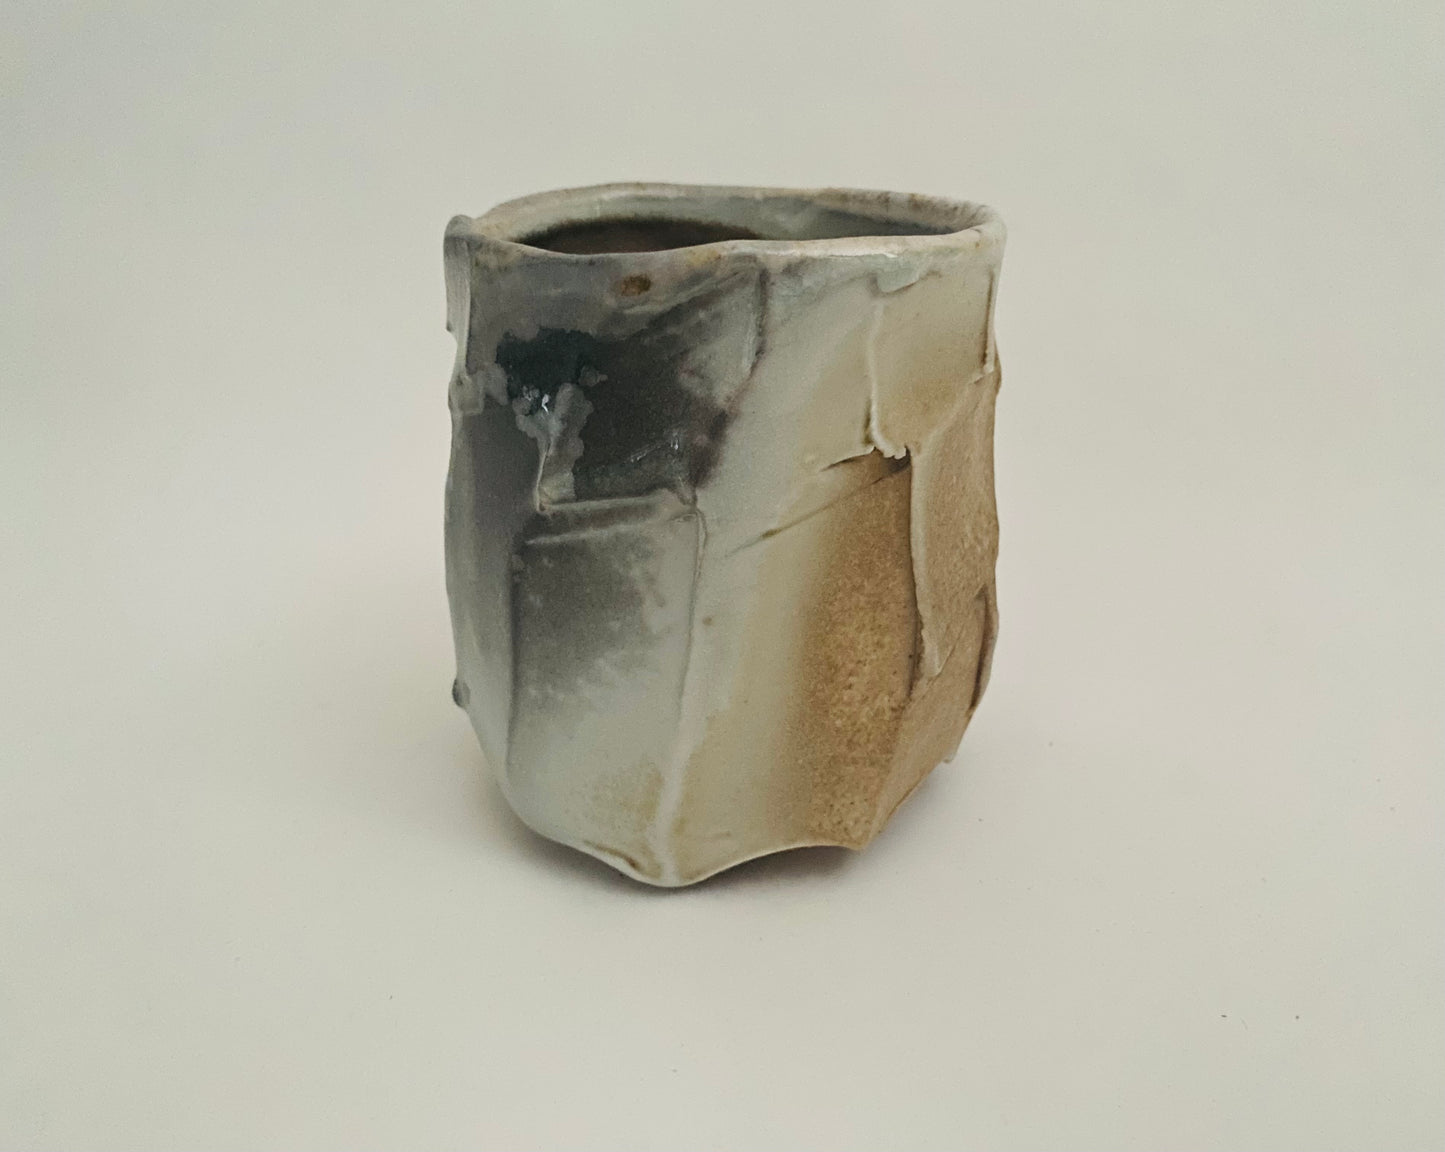 Wood fired porcelain faceted cup